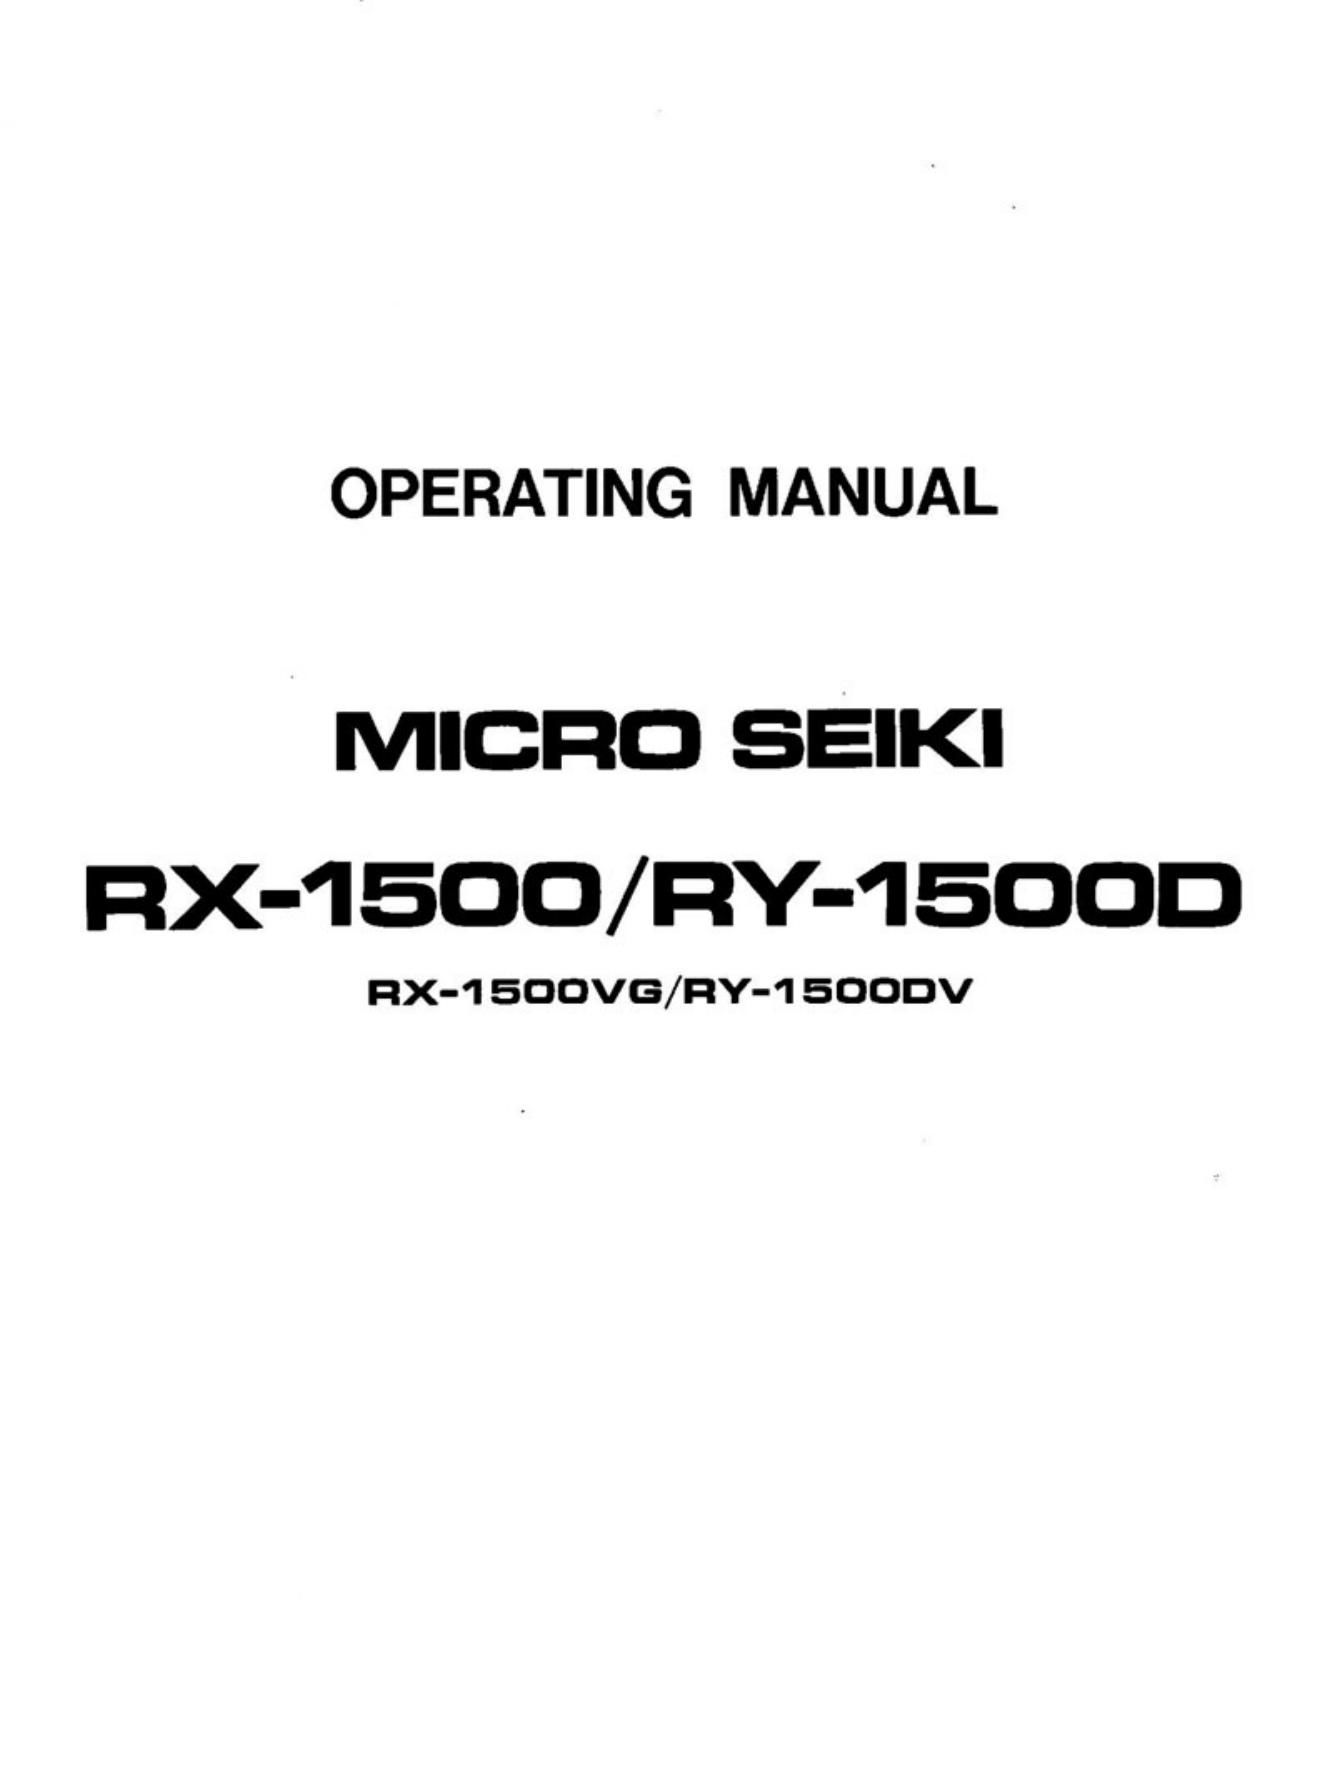 micro seiki rx 1500 ry 1500D owners manual